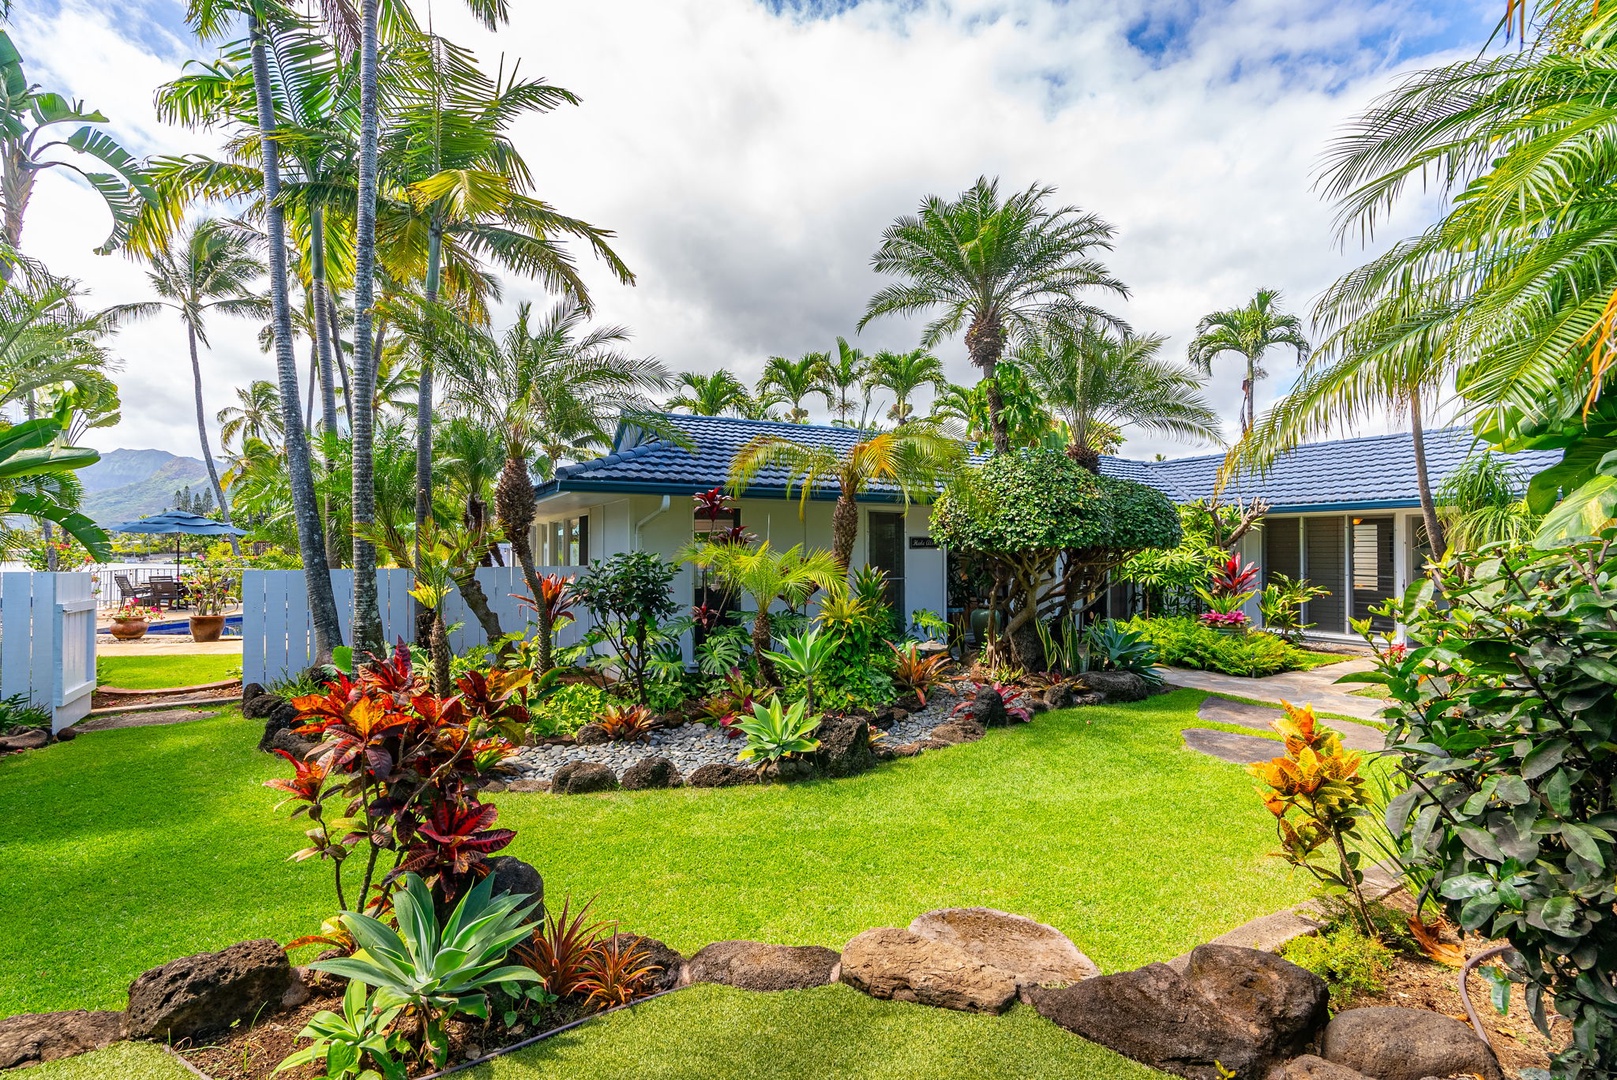 Kailua Vacation Rentals, Hale Aloha - Settled at the end of a serene cul-de-sac, surrounded by lush tropical flora.